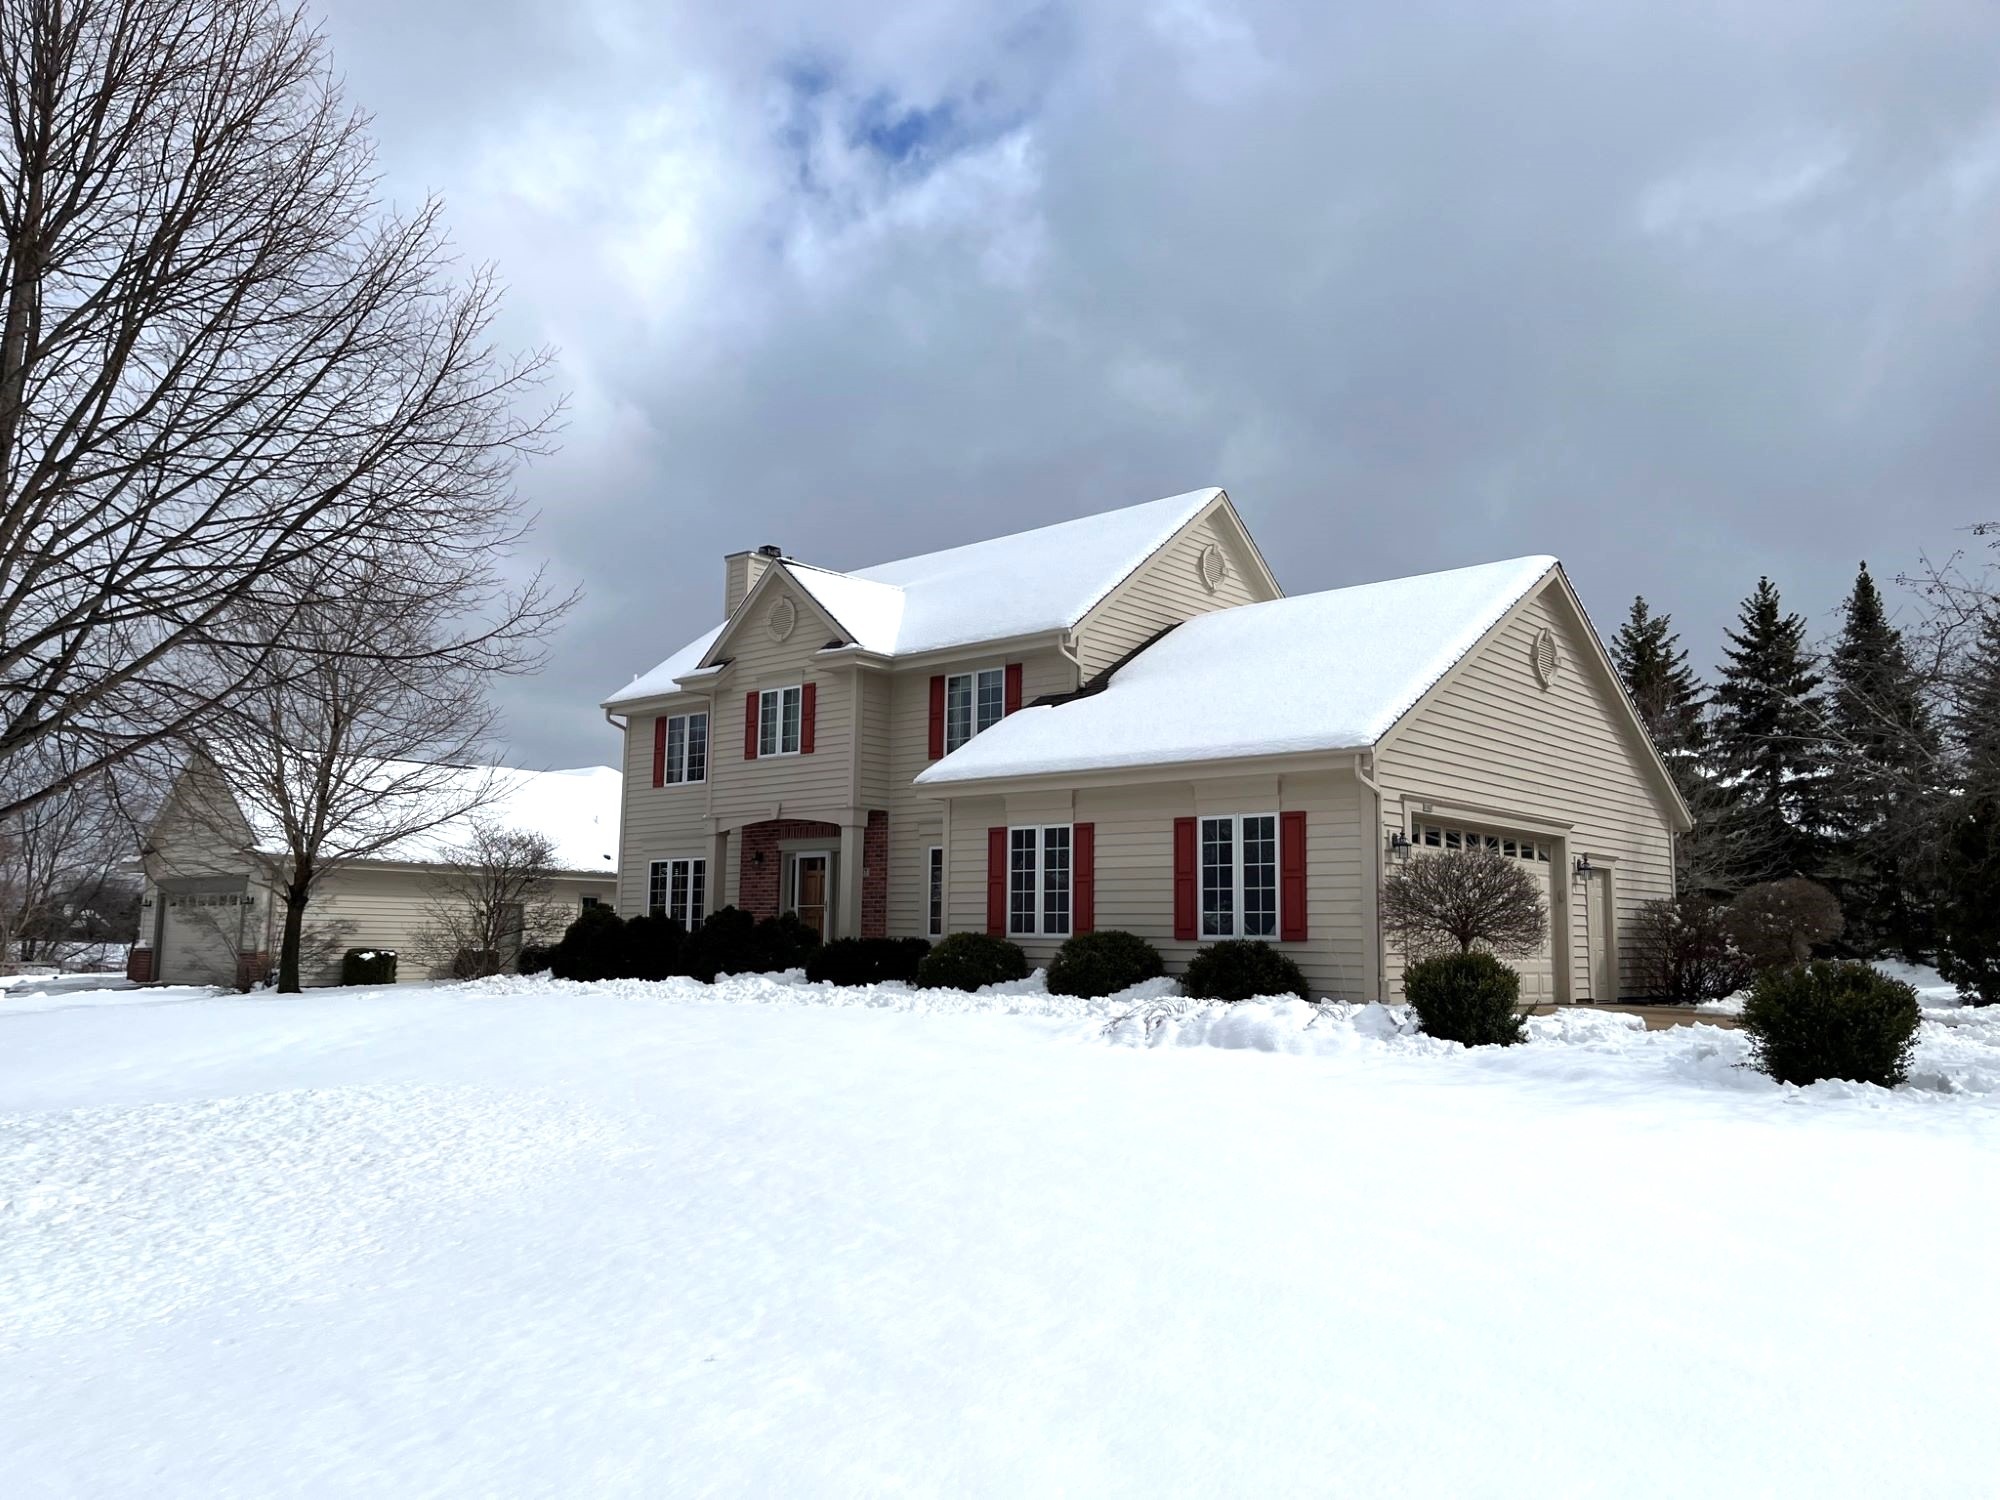 8157 W Woodfield Dr – Franklin – 4 BR – Two Story Colonial